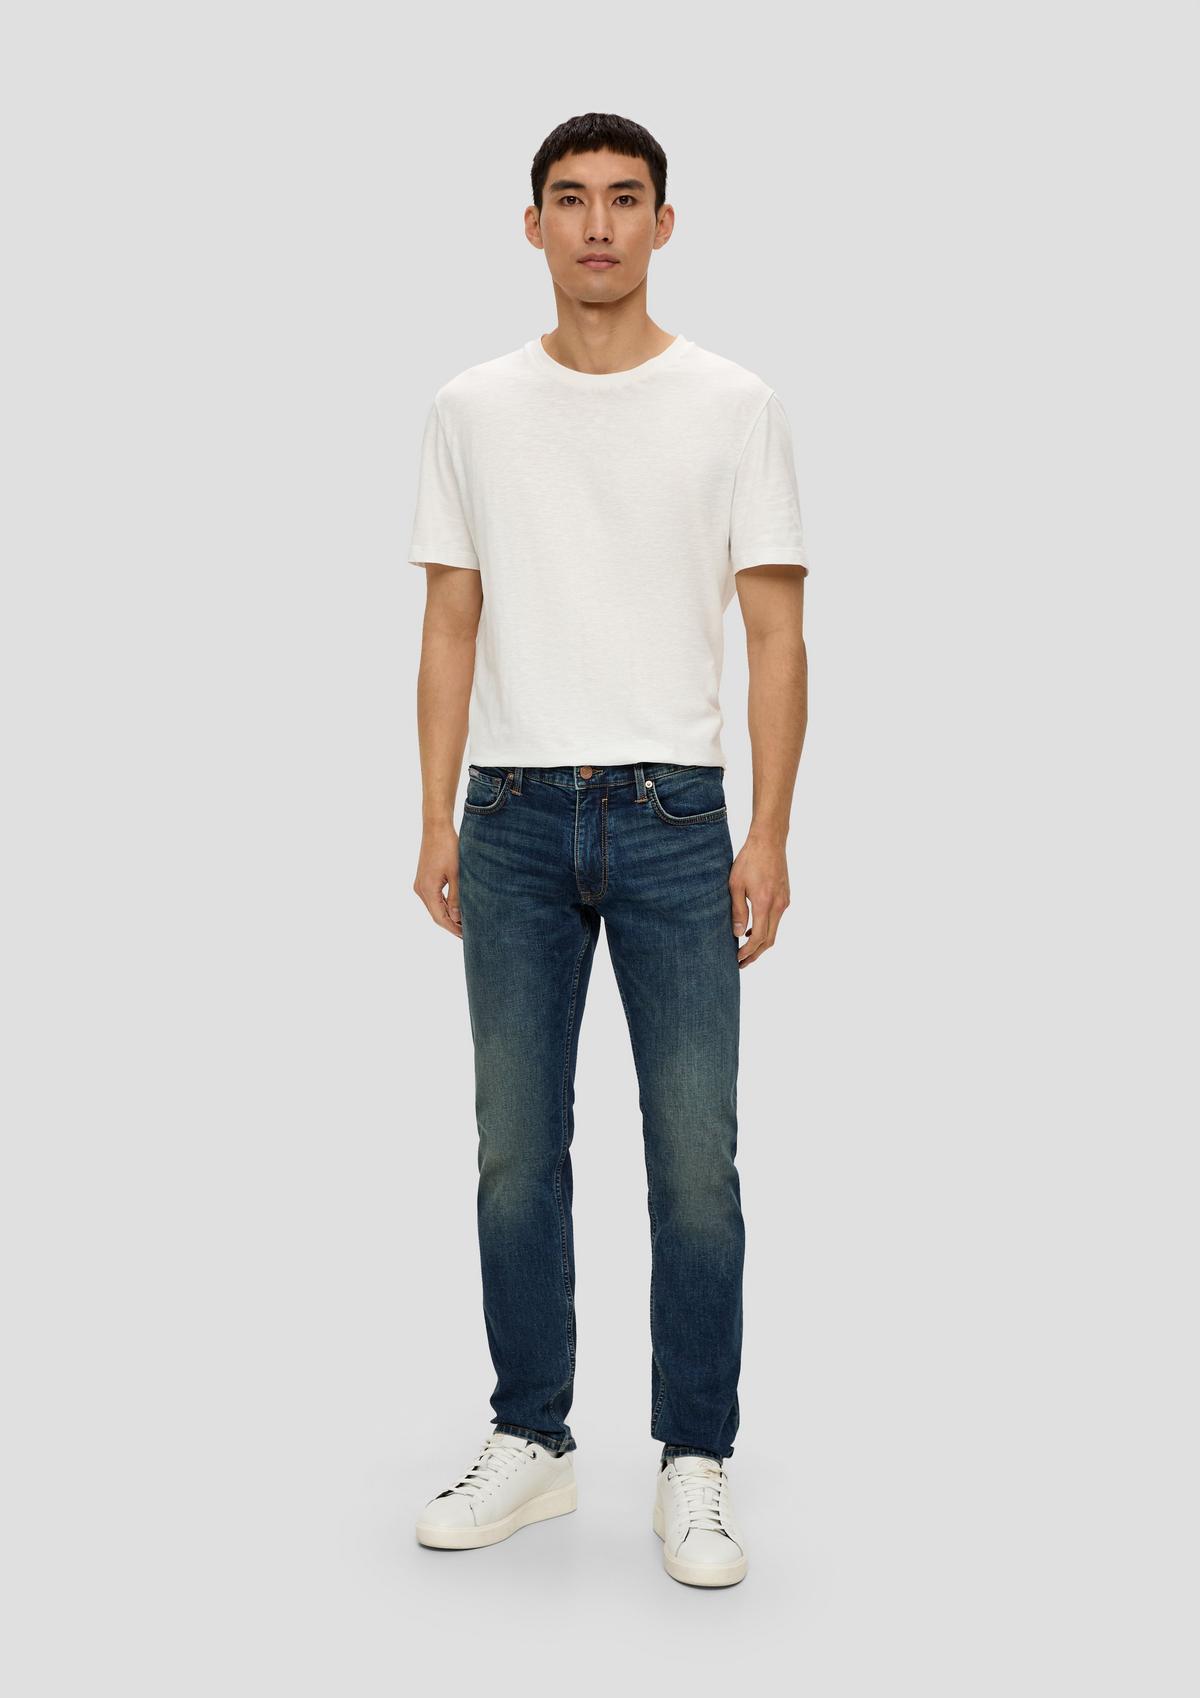 Jeans Keith / Slim Fit / Mid Rise / Straight Leg